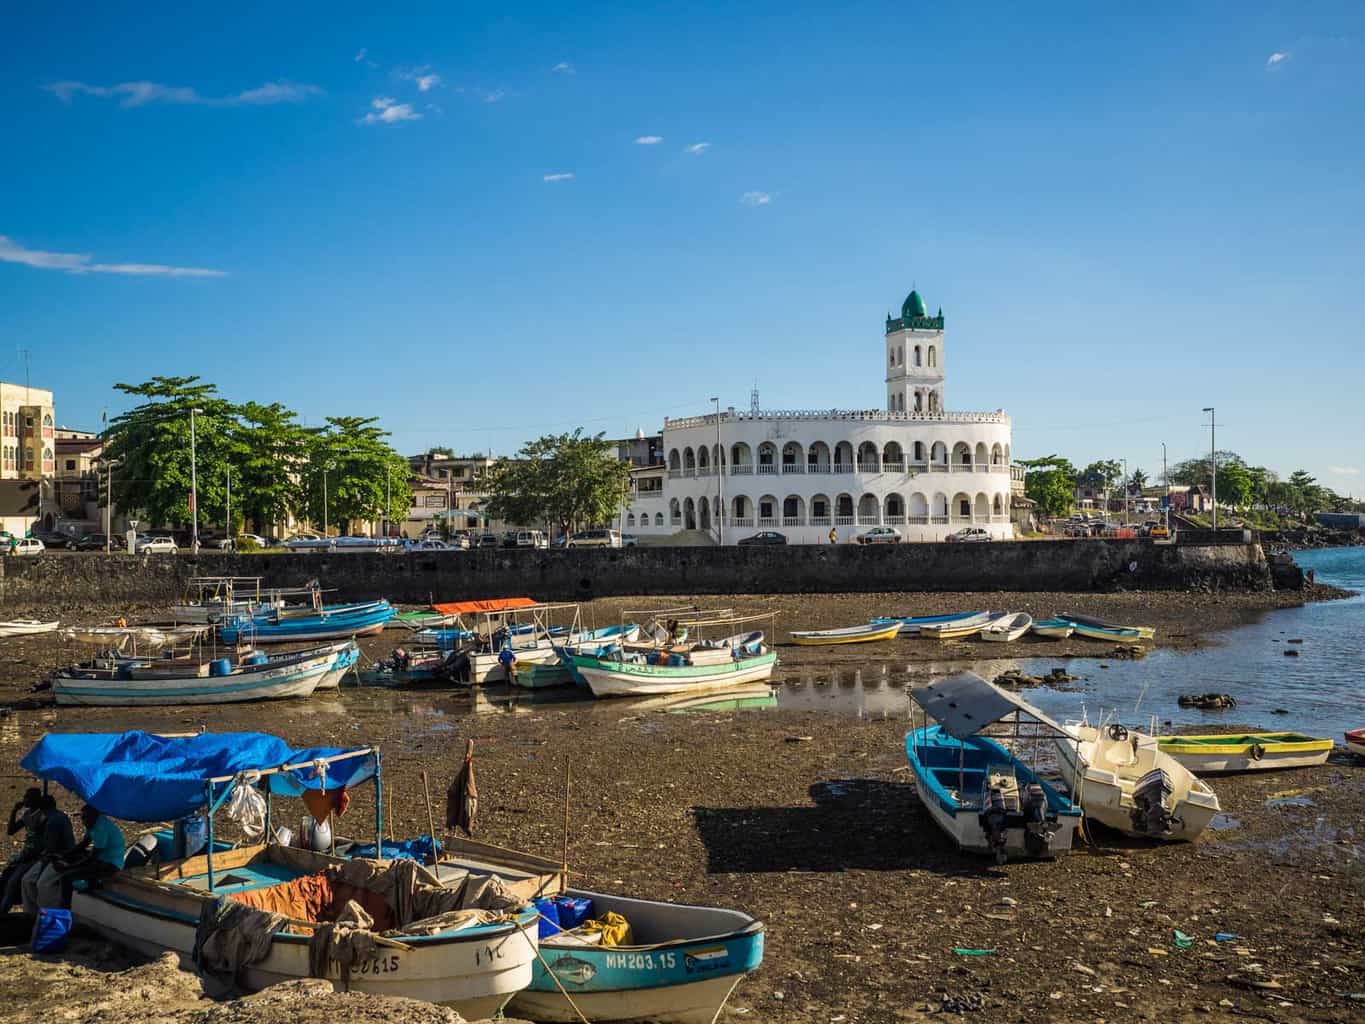 The most famous landmark Comoros the Ancienne Mosquée de Vendredi (old Friday mosque. dating back to around 1427